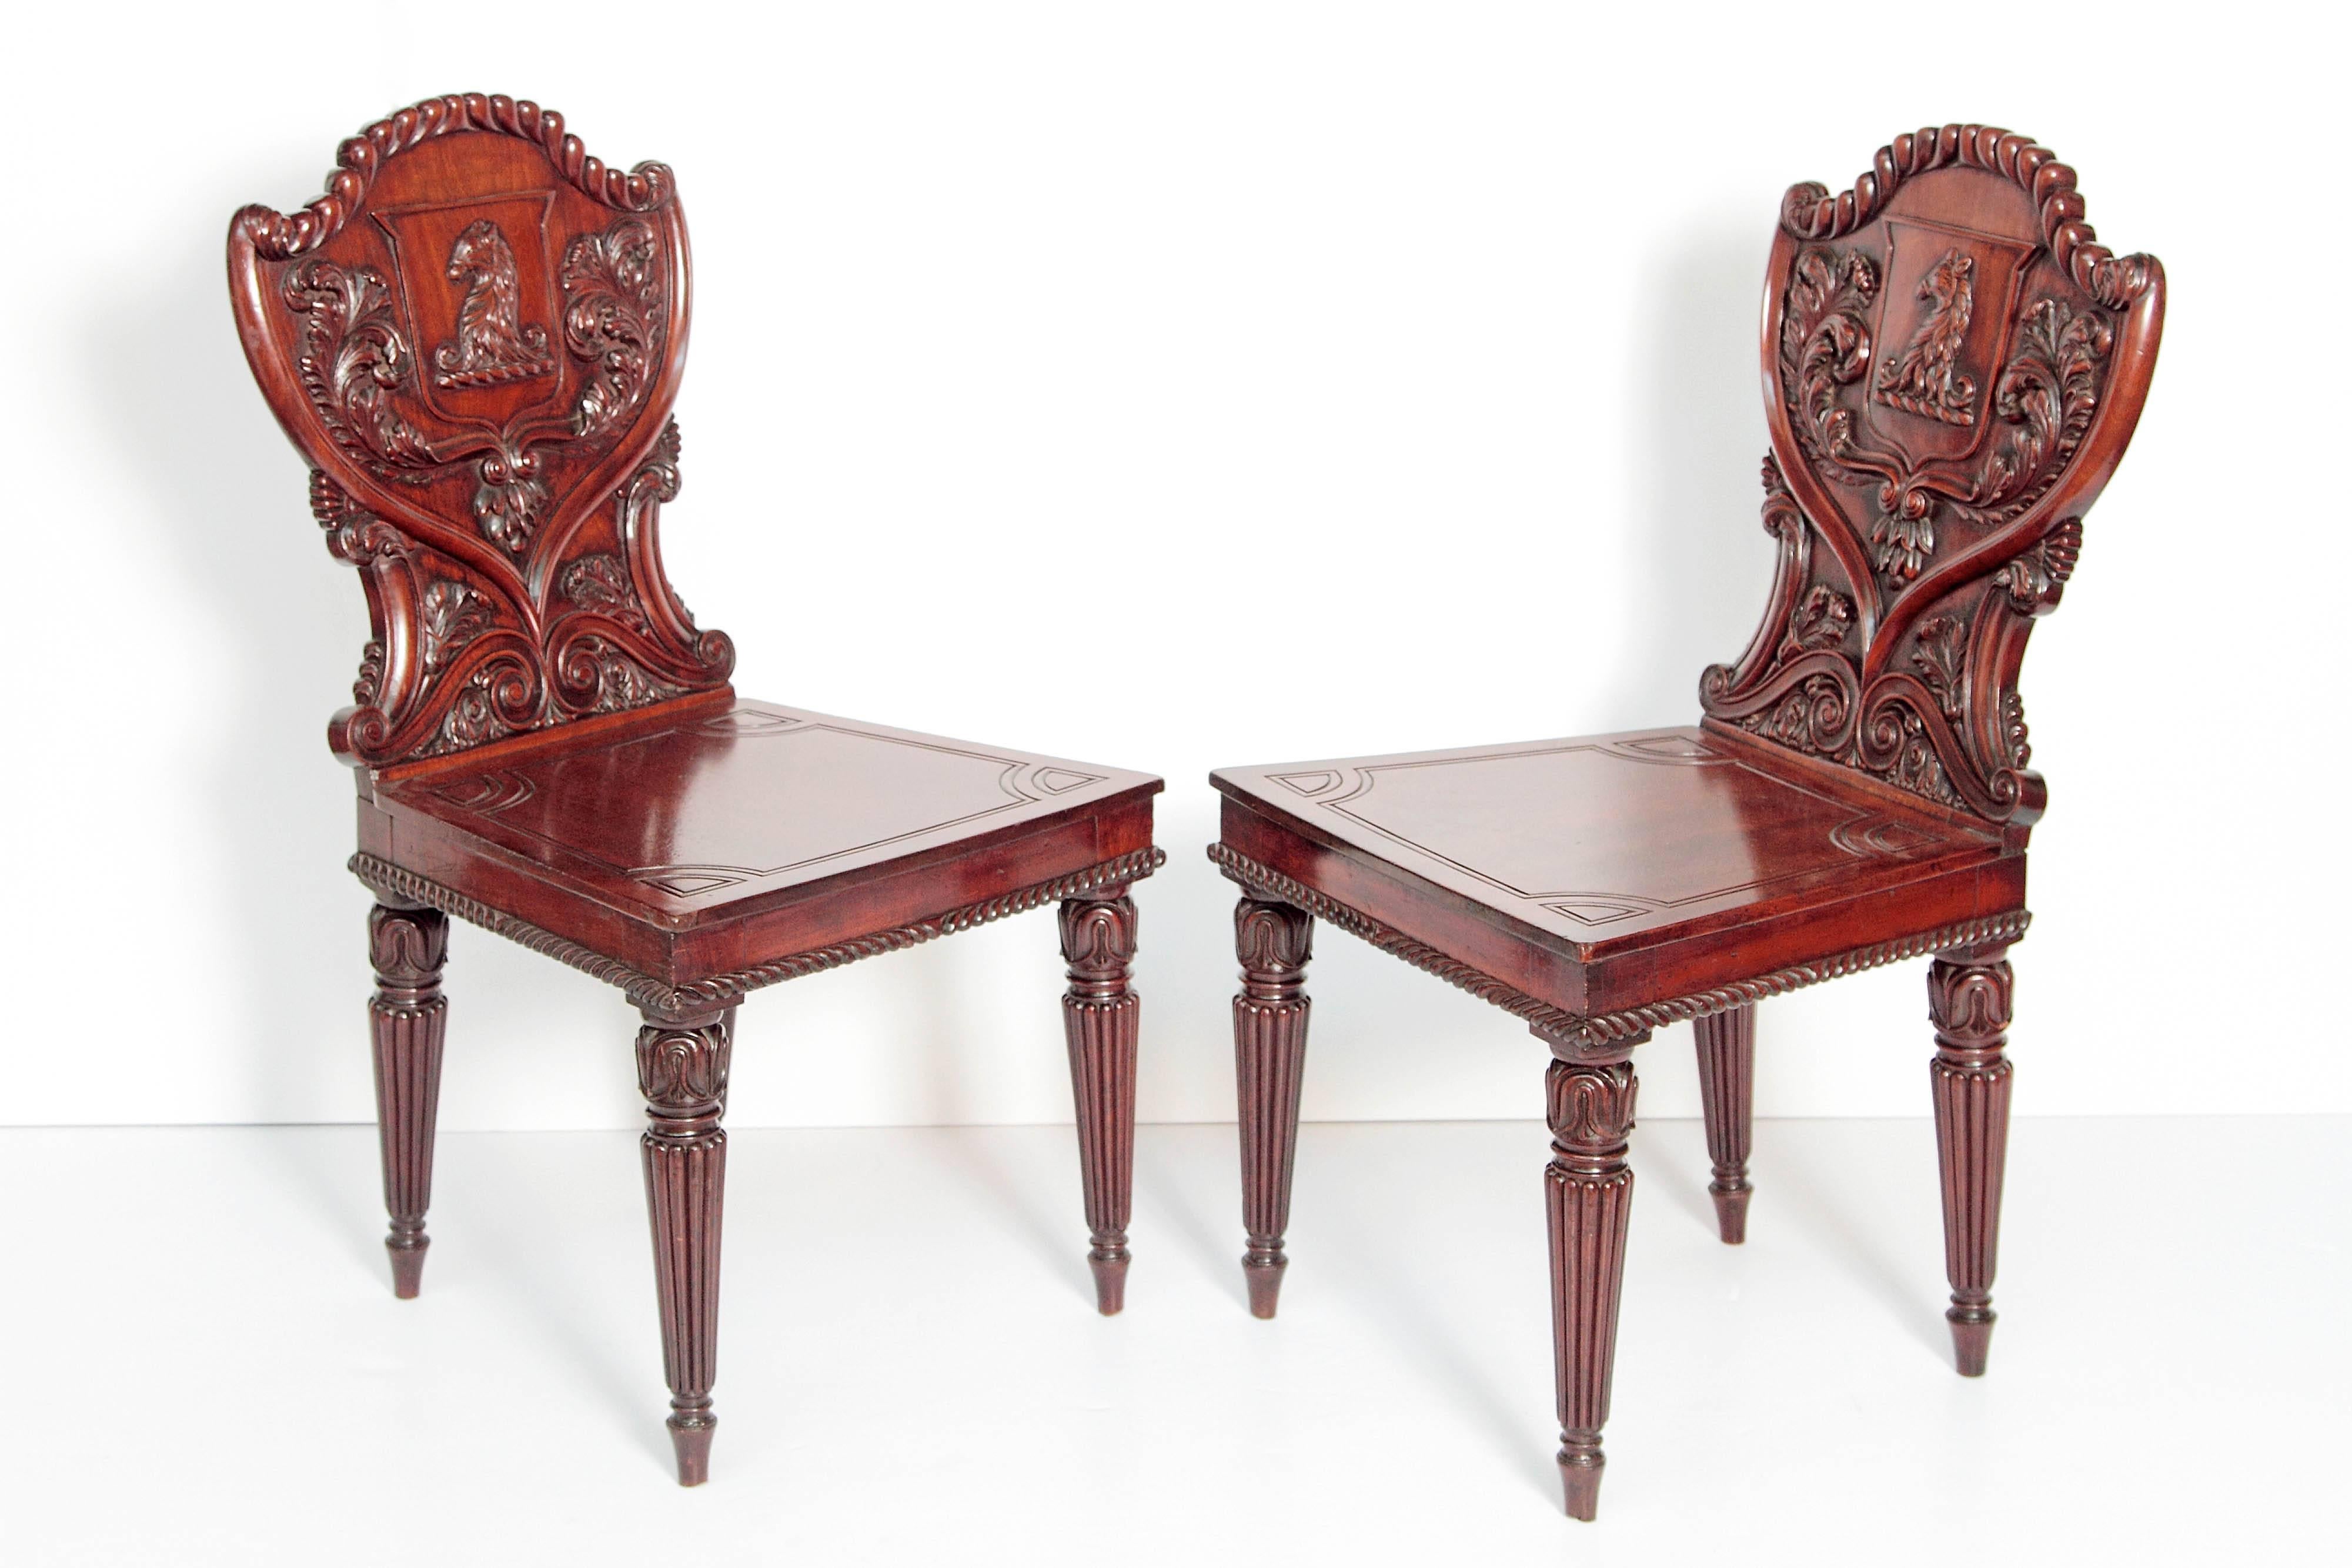 A pair of English Regency mahogany shield back hall chairs. Carved with erased muzzled bear's head. Acanthus leaves and Flemish scrolls. Round tapered reeded legs, circa 1810.